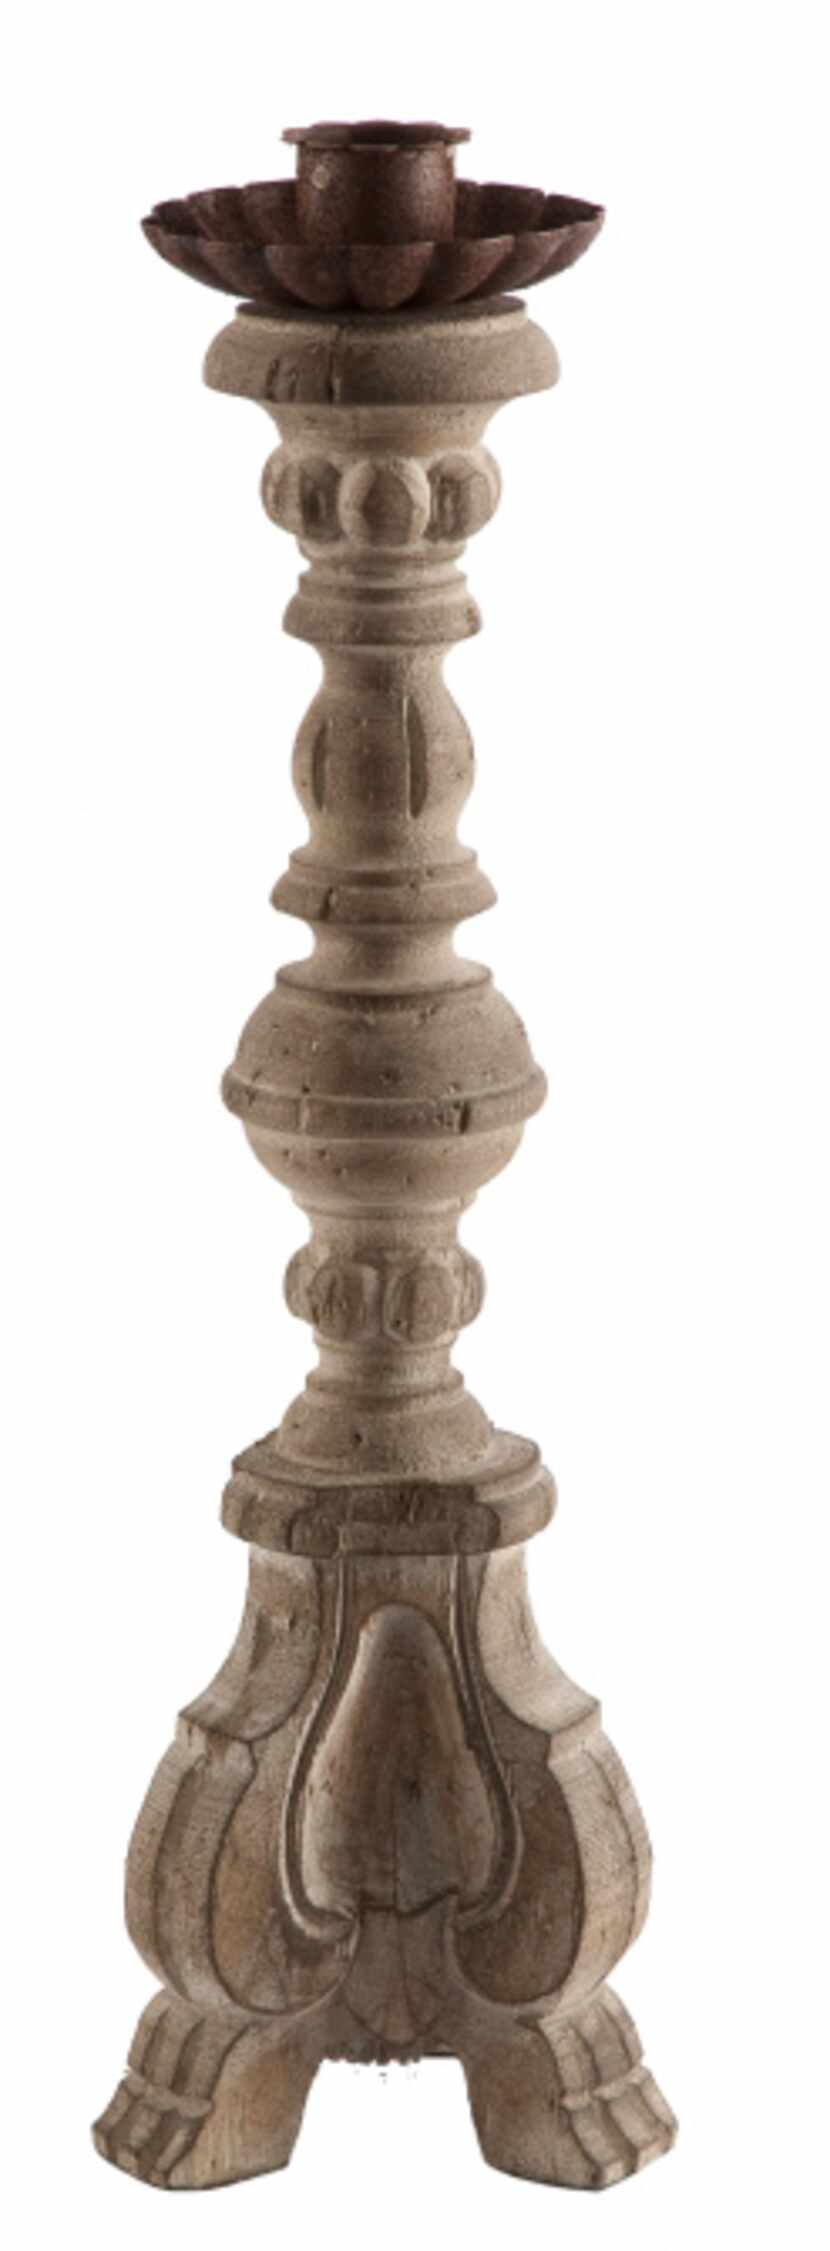 For the traditionalist, the Turin pillar candlestick rises 14 inches and includes a drip...